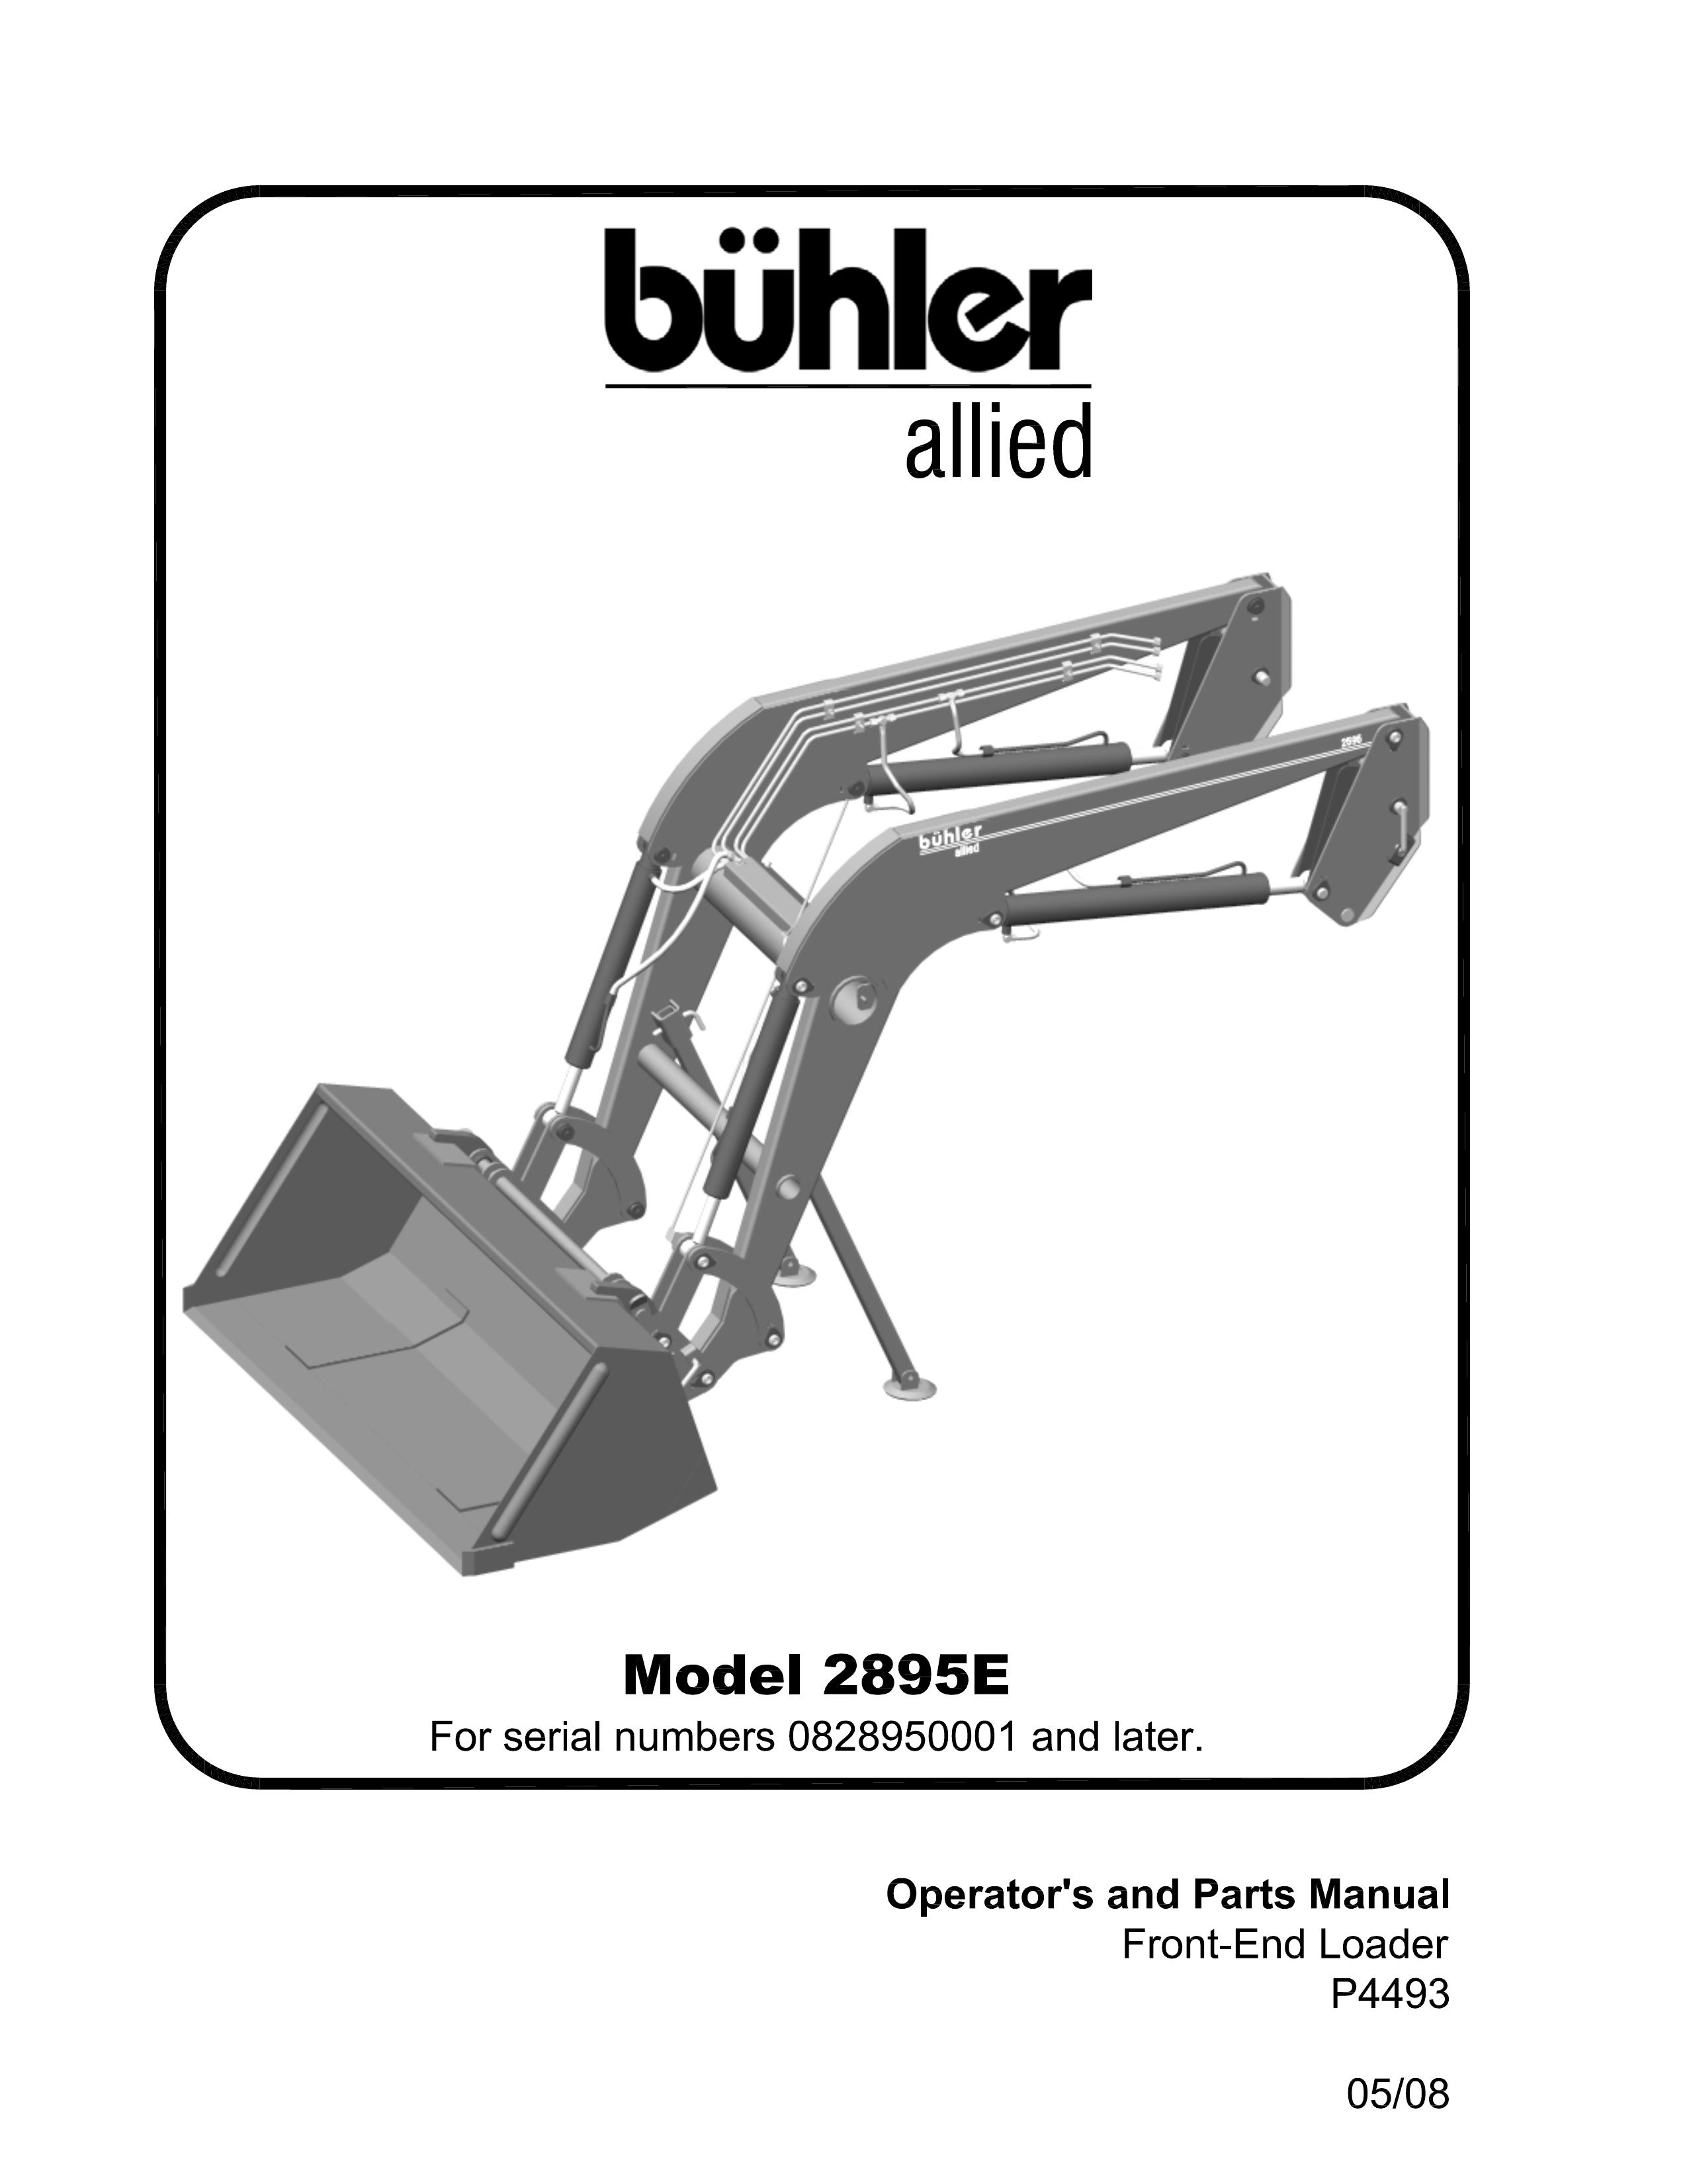 Buhler 2895E Clothes Dryer User Manual